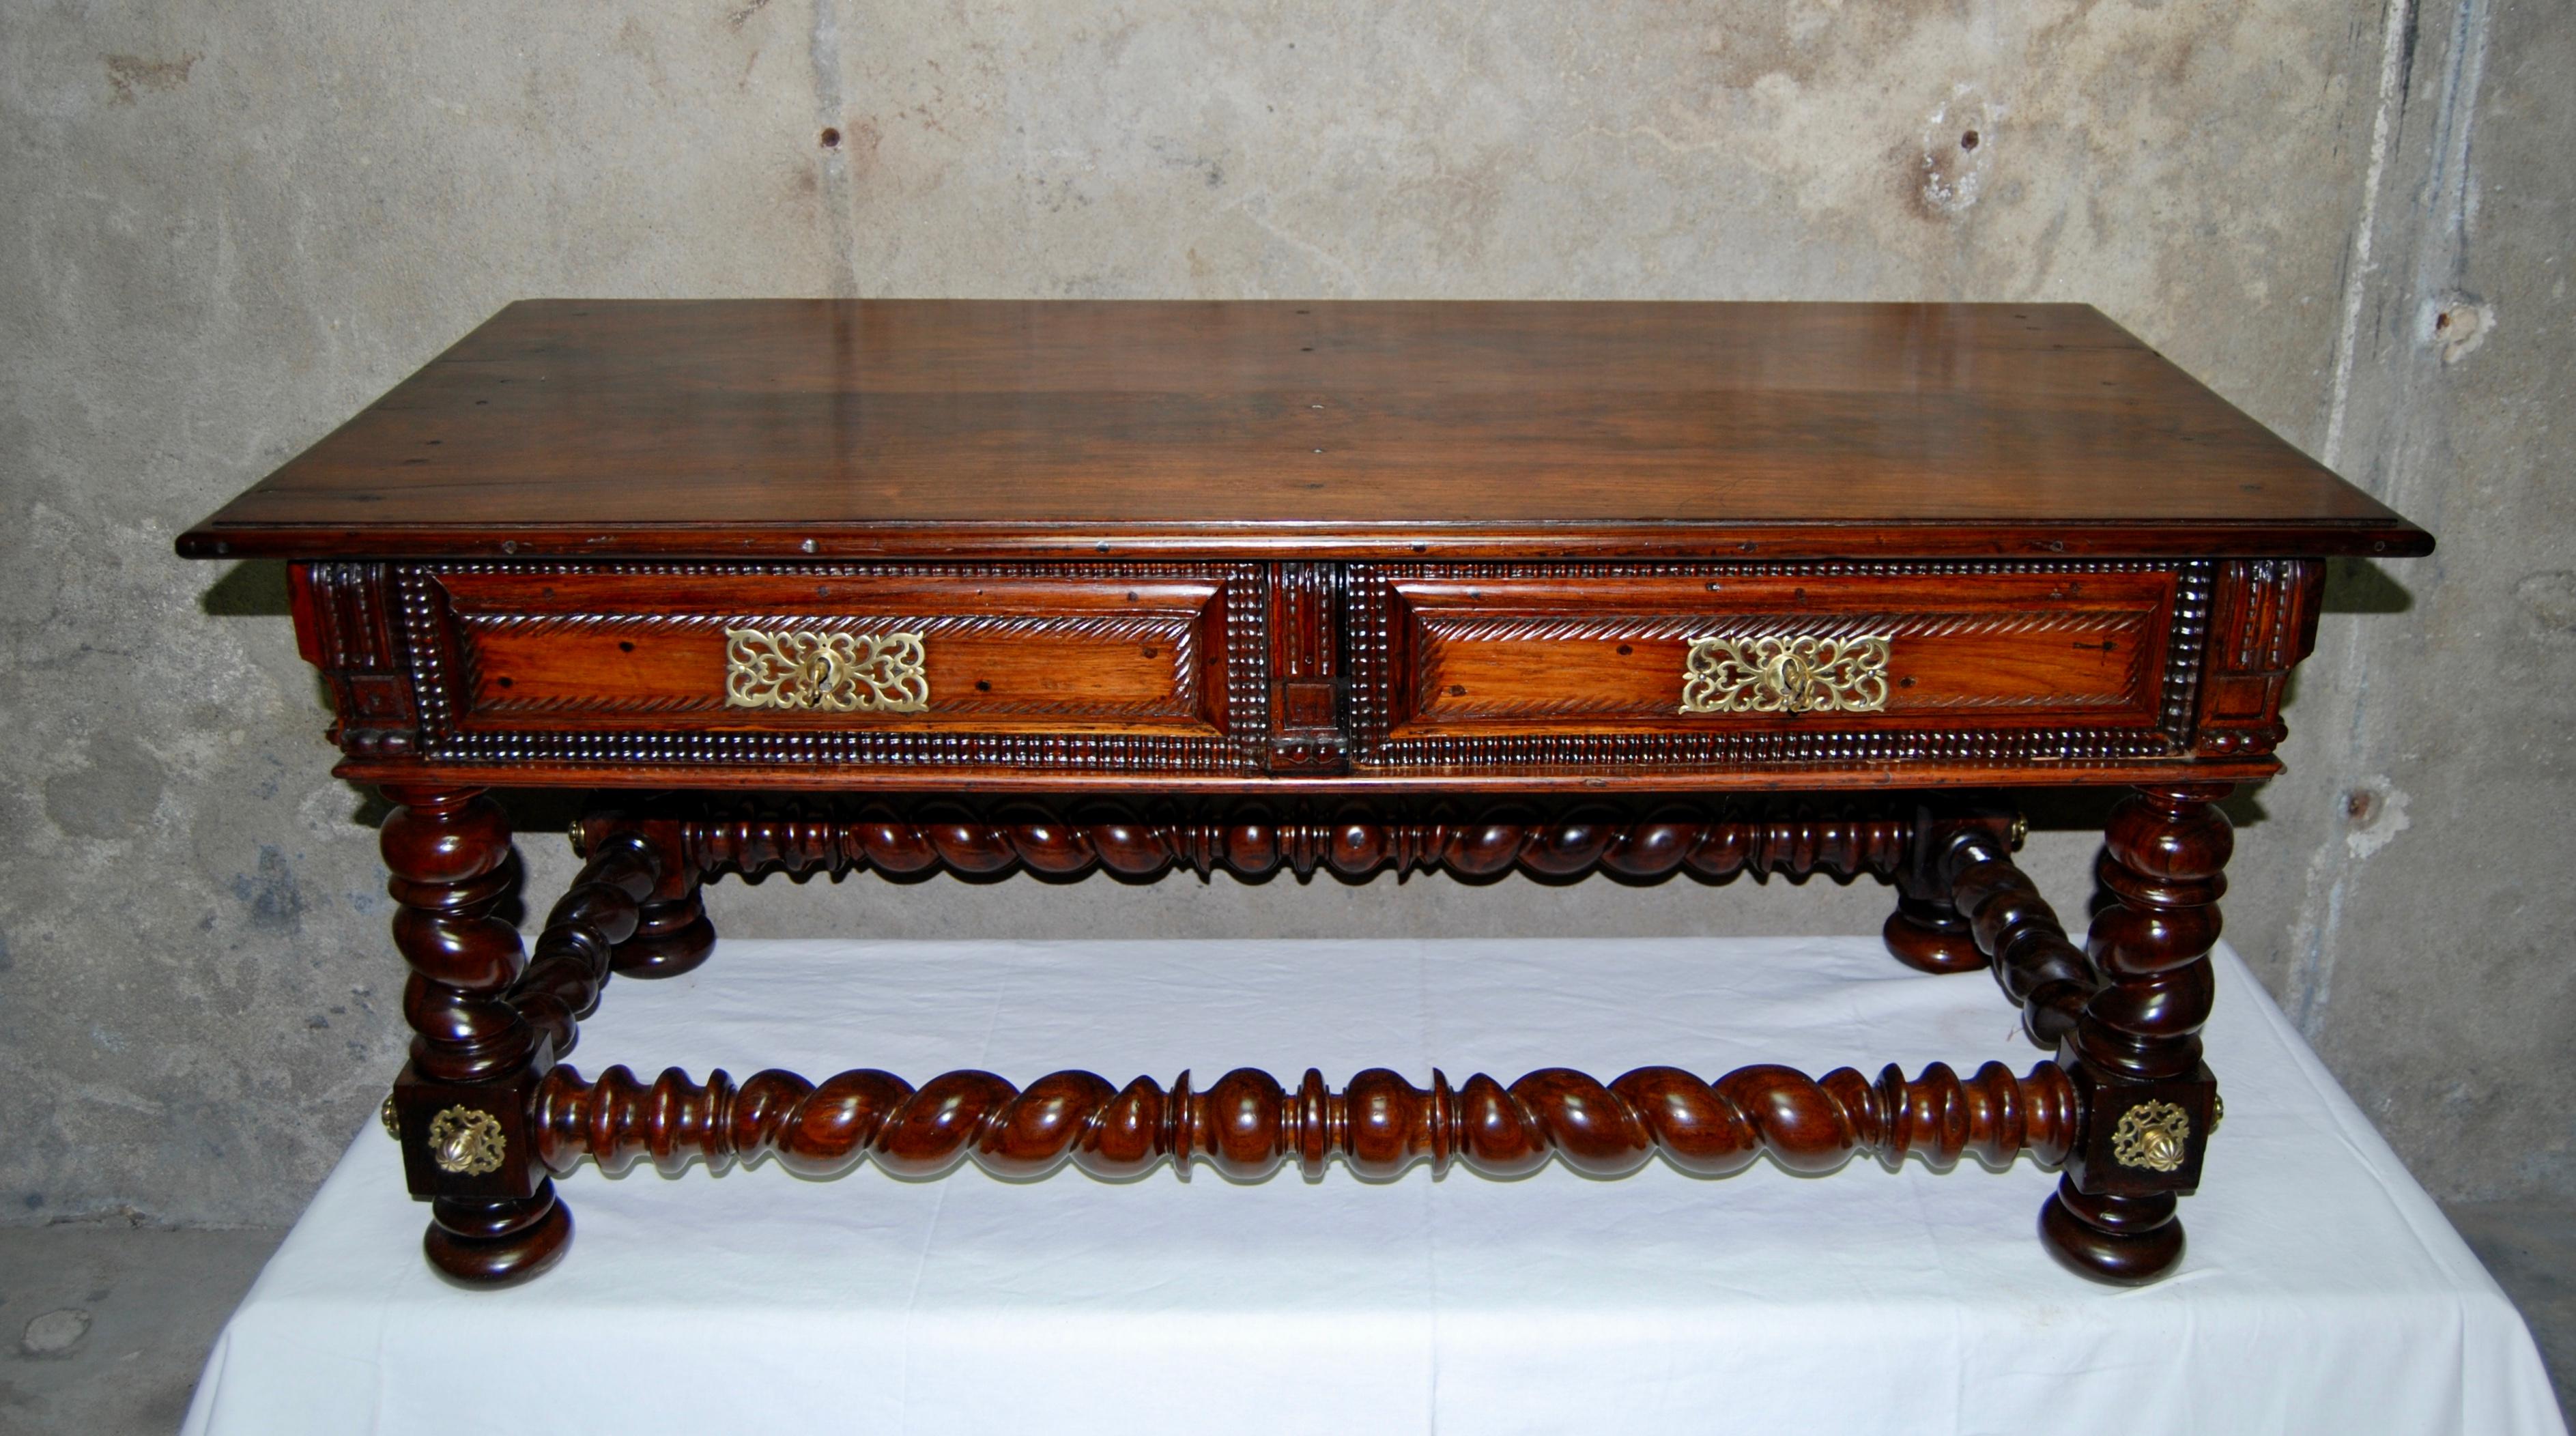 This remarkable table is made of solid rosewood, turned and richly carved.
Decorated with gilded bronze openwork at the feet and around the locks.
The 4 legs are connected by turned wood stretchers.
It has two drawers opening on one side, with